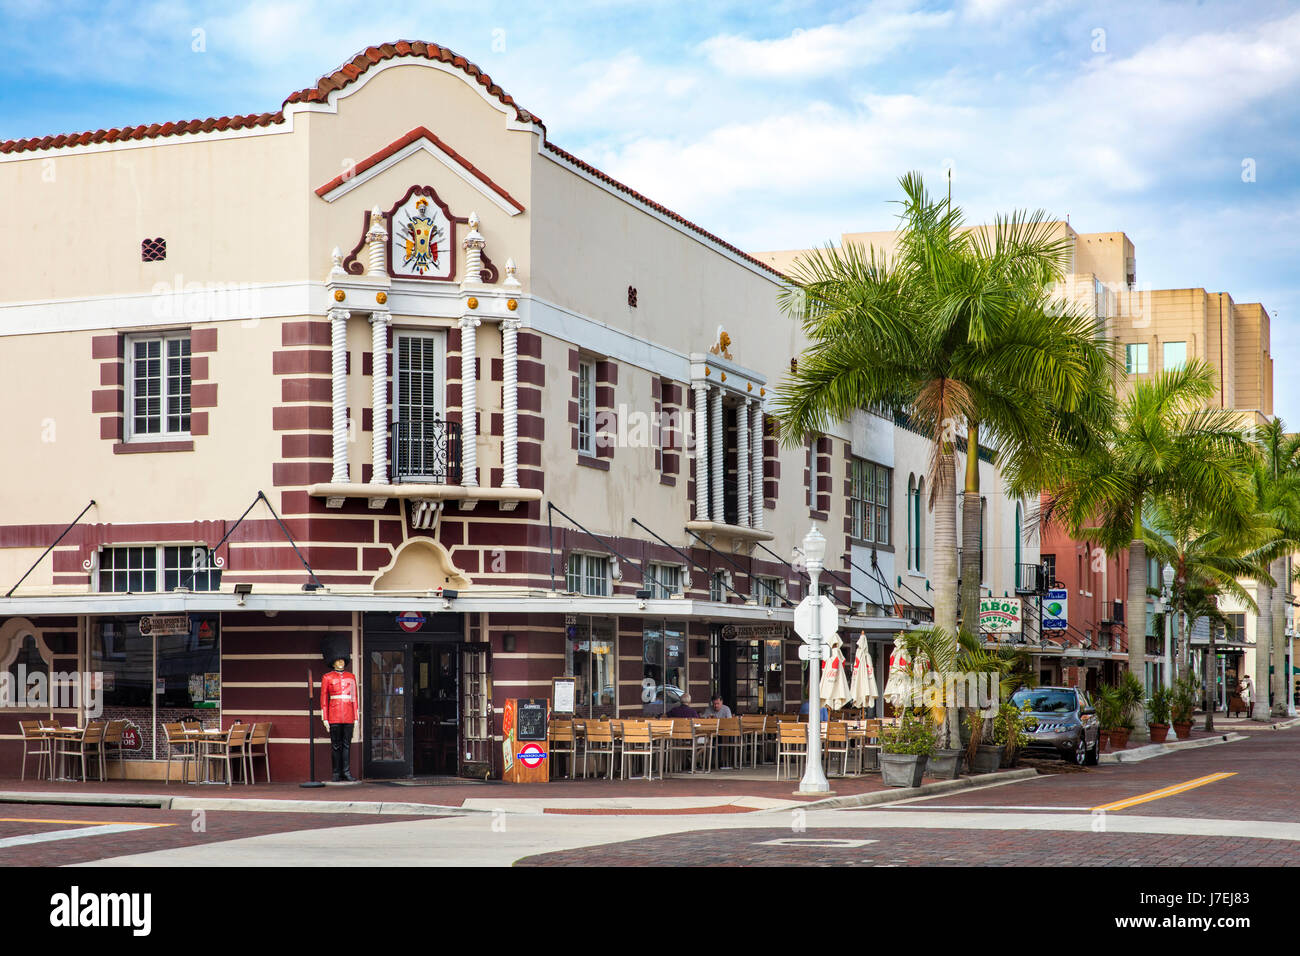 United Ale House - a UK themed pub along historic First Street in Fort Myers, Florida, USA Stock Photo